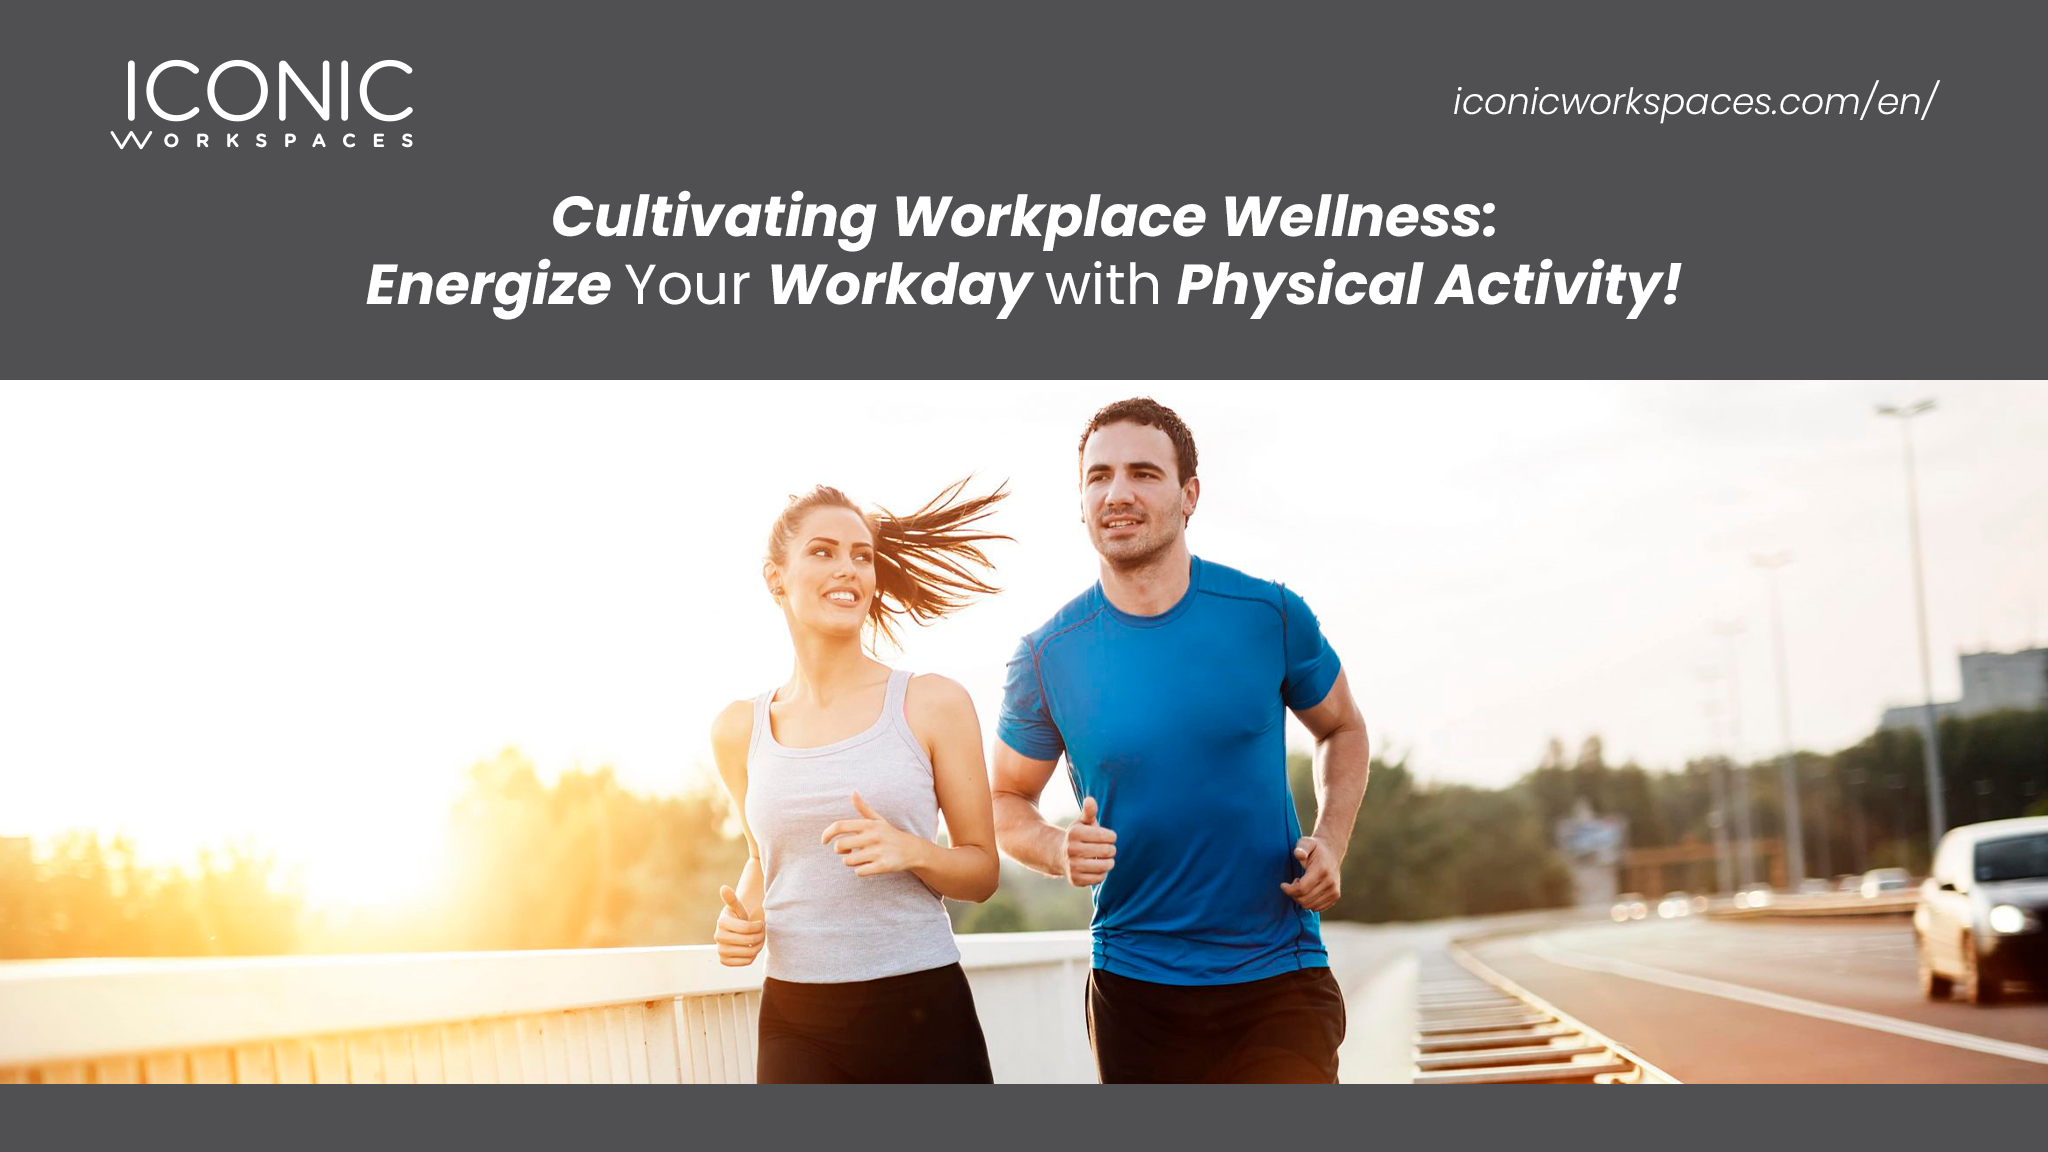 Cultivating Workplace Wellness: Energize Your Workday with Physical Activity